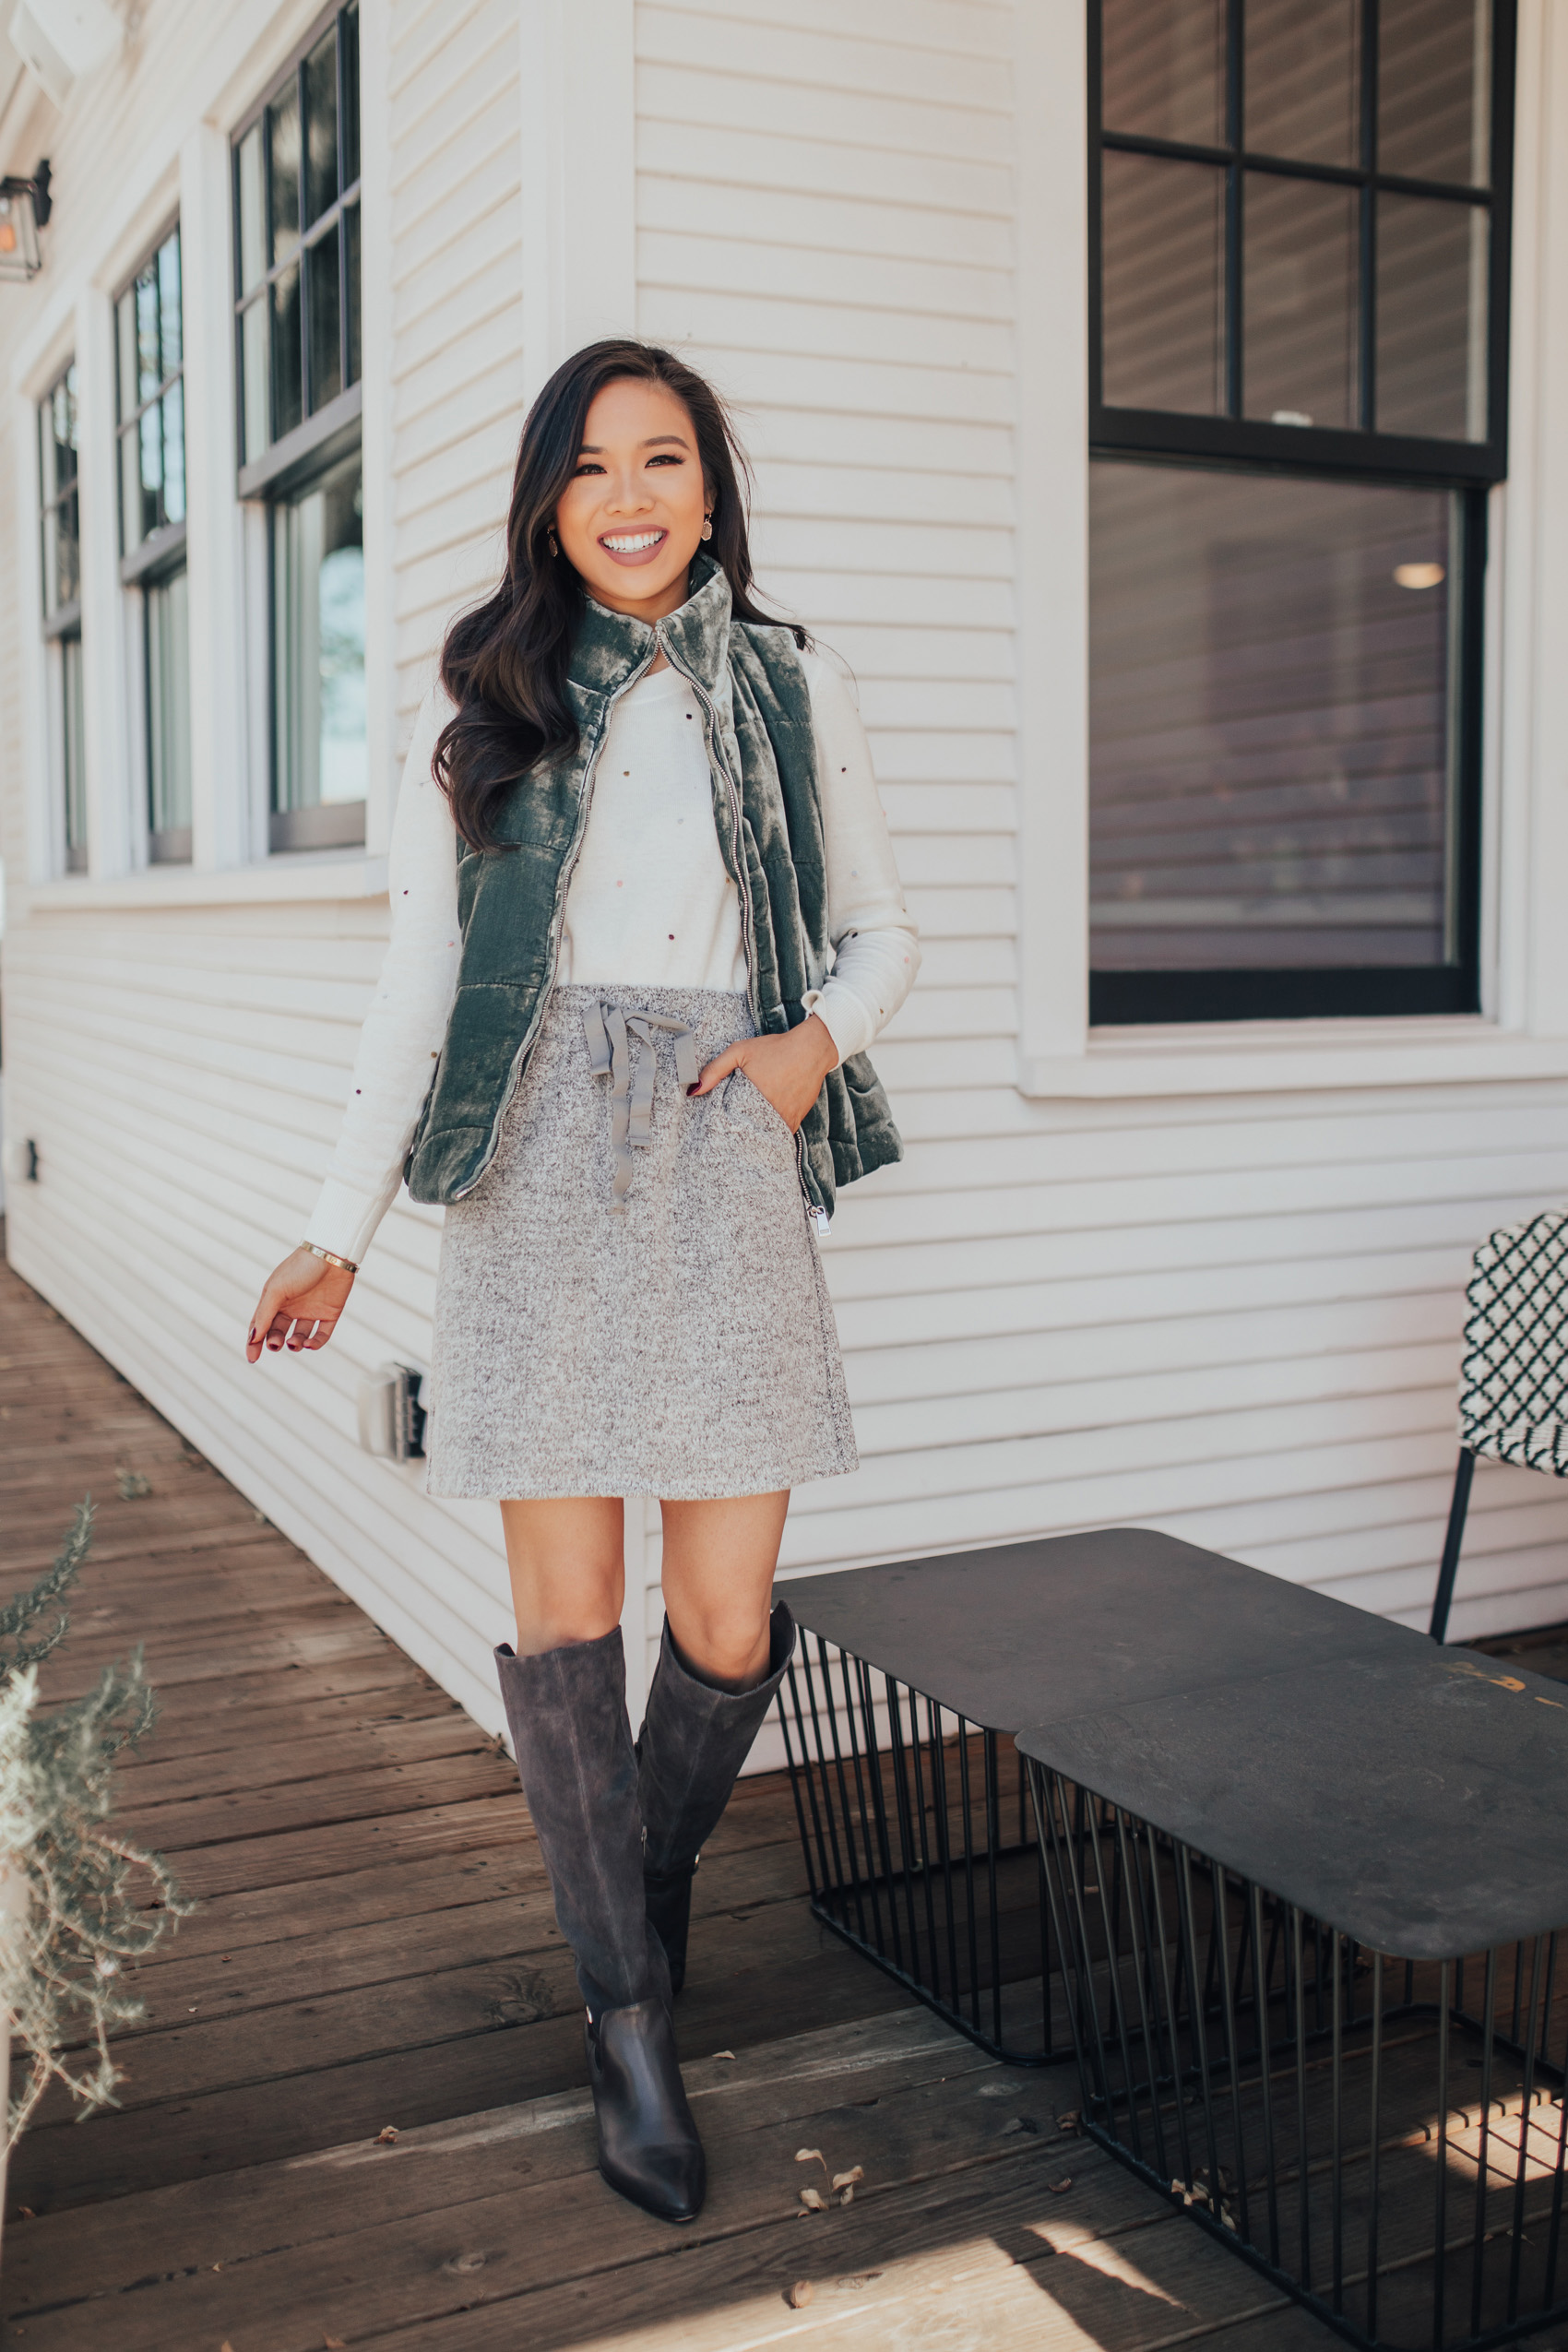 Velvet vest for a simple fall outfit idea with knee high boots